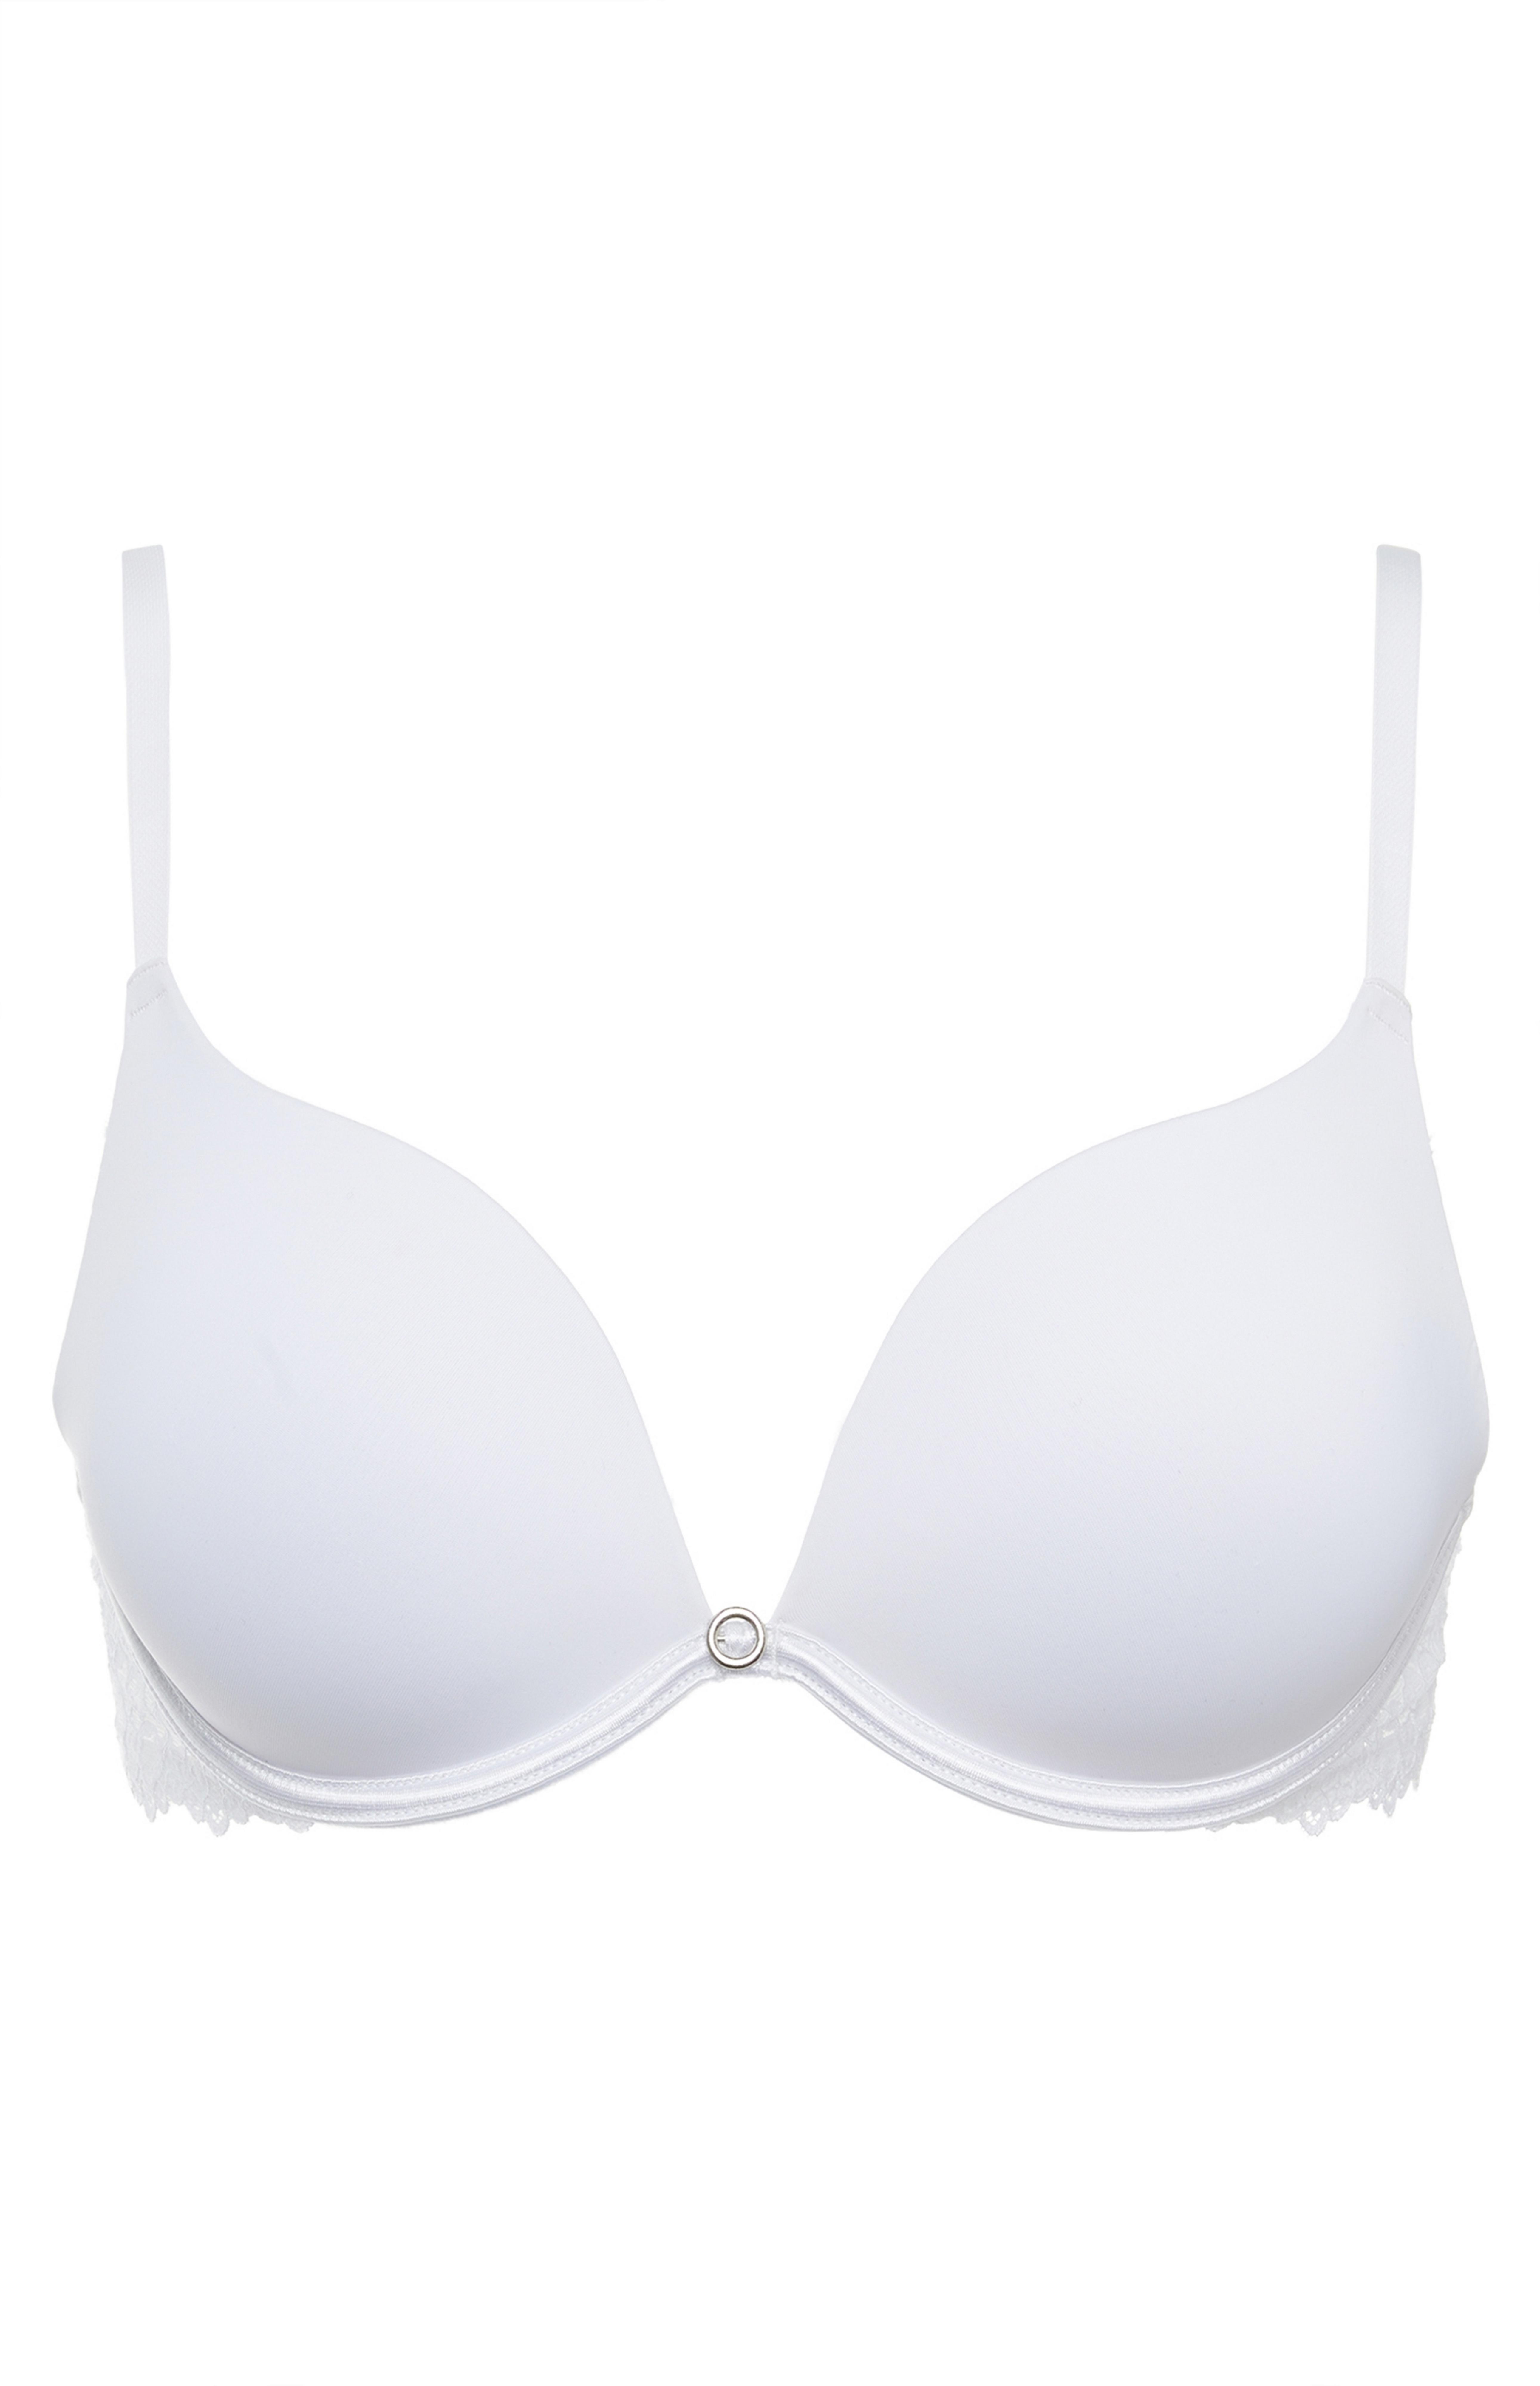 White Push Up Bra With Lace | T-shirt Bras | Bras | Lingerie ...